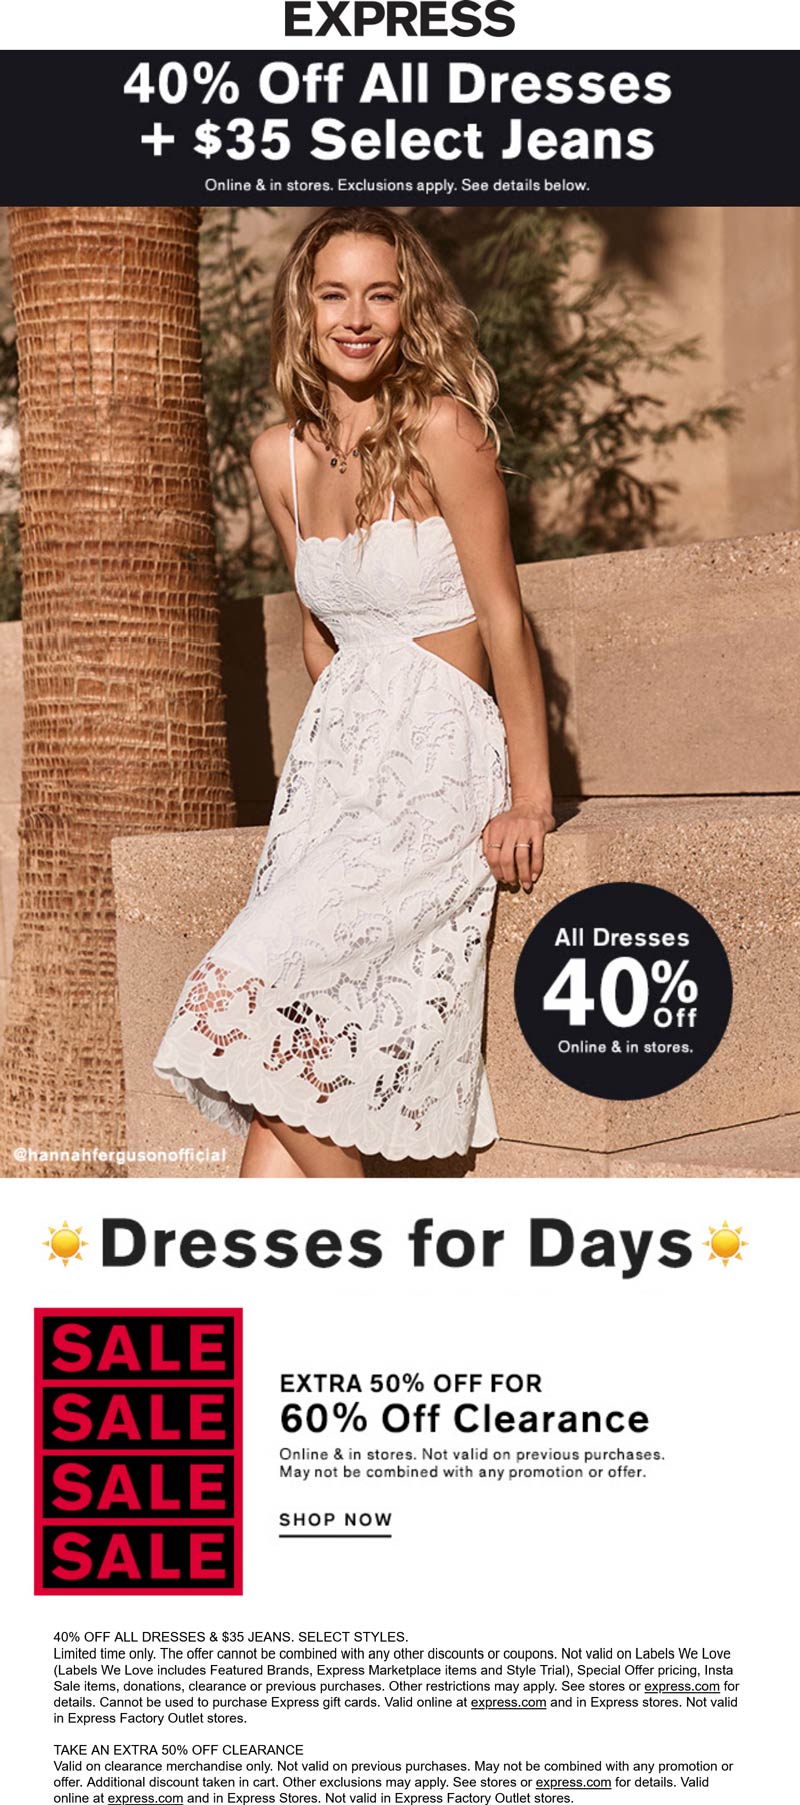 Express stores Coupon  40% off all dresses & extra 60% off clearance at Express, also online #express 